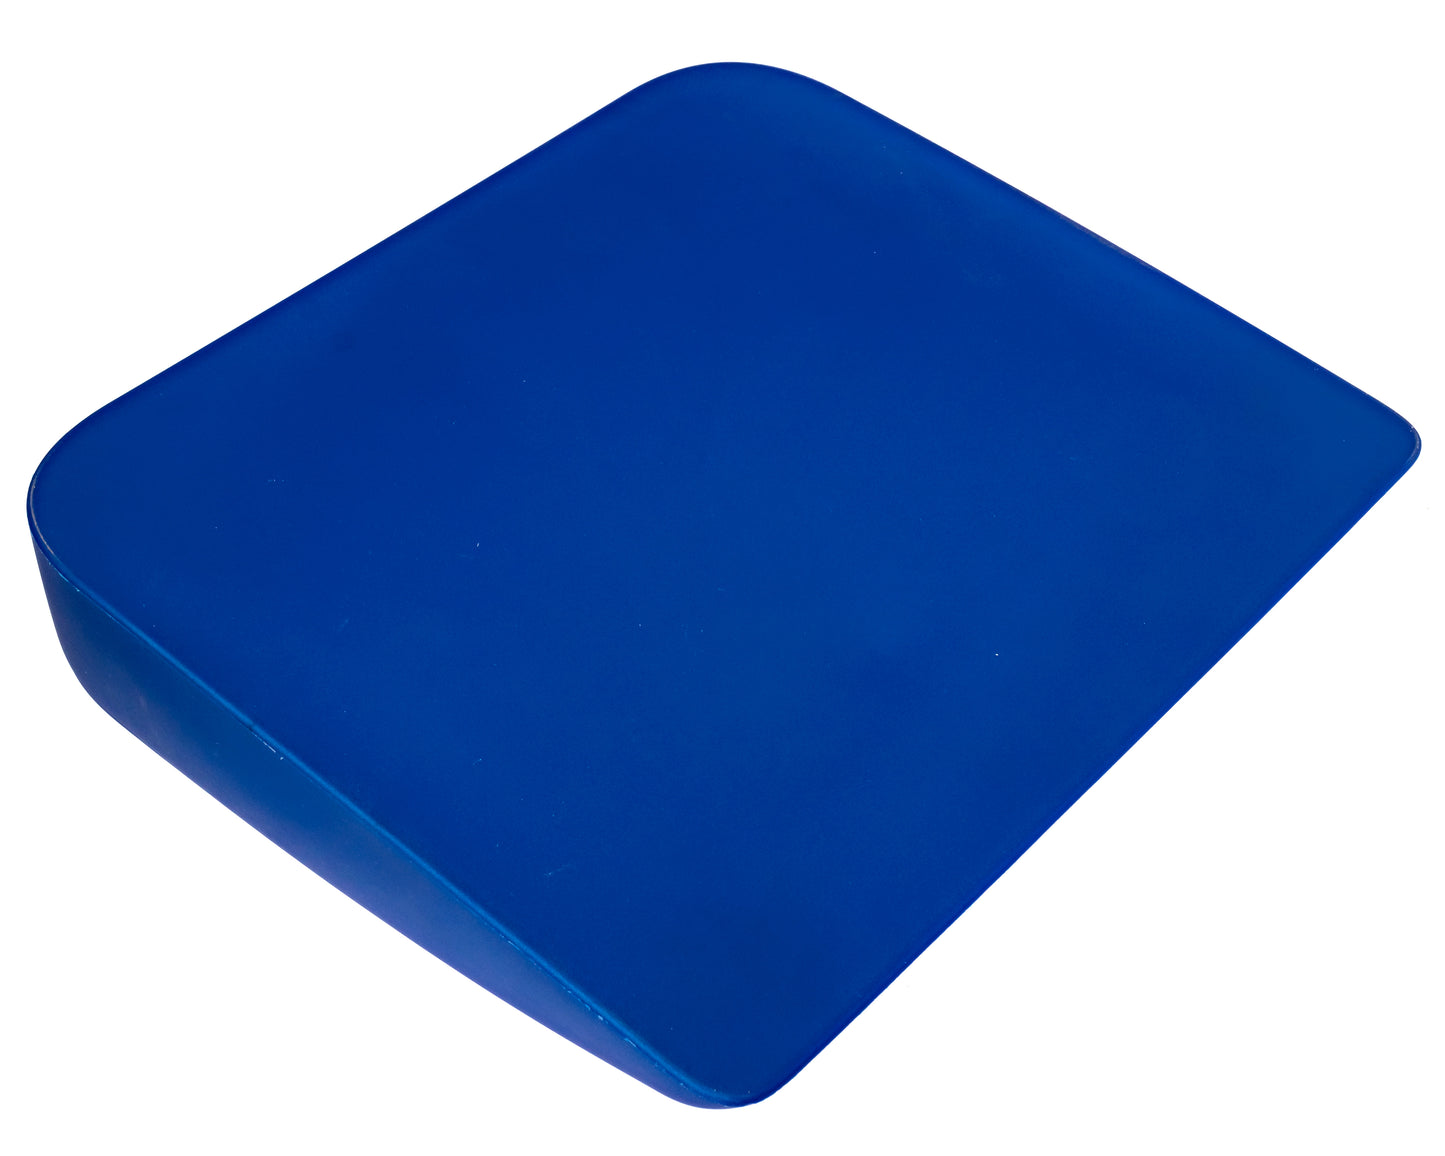 Wedge Seat for Active Seating - Blue